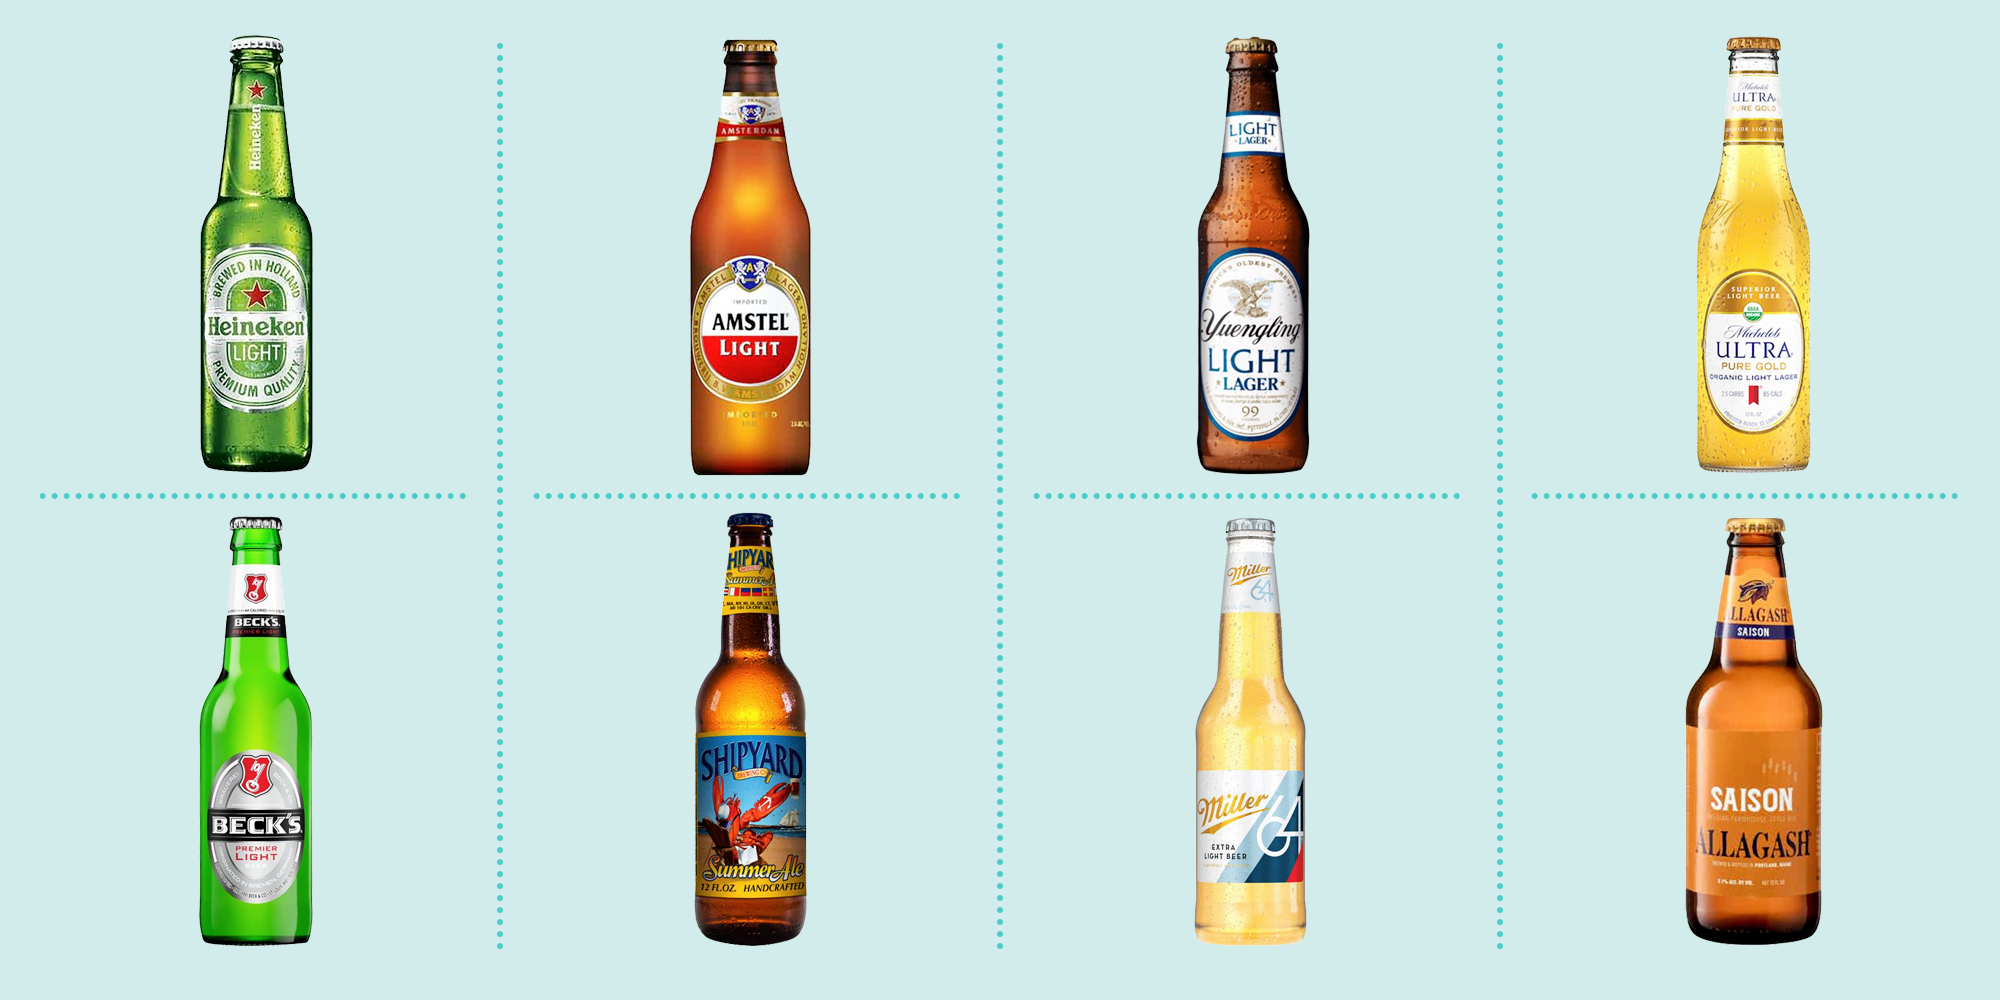 15 Best Low-Carb Beers - Keto-Friendly Lagers and